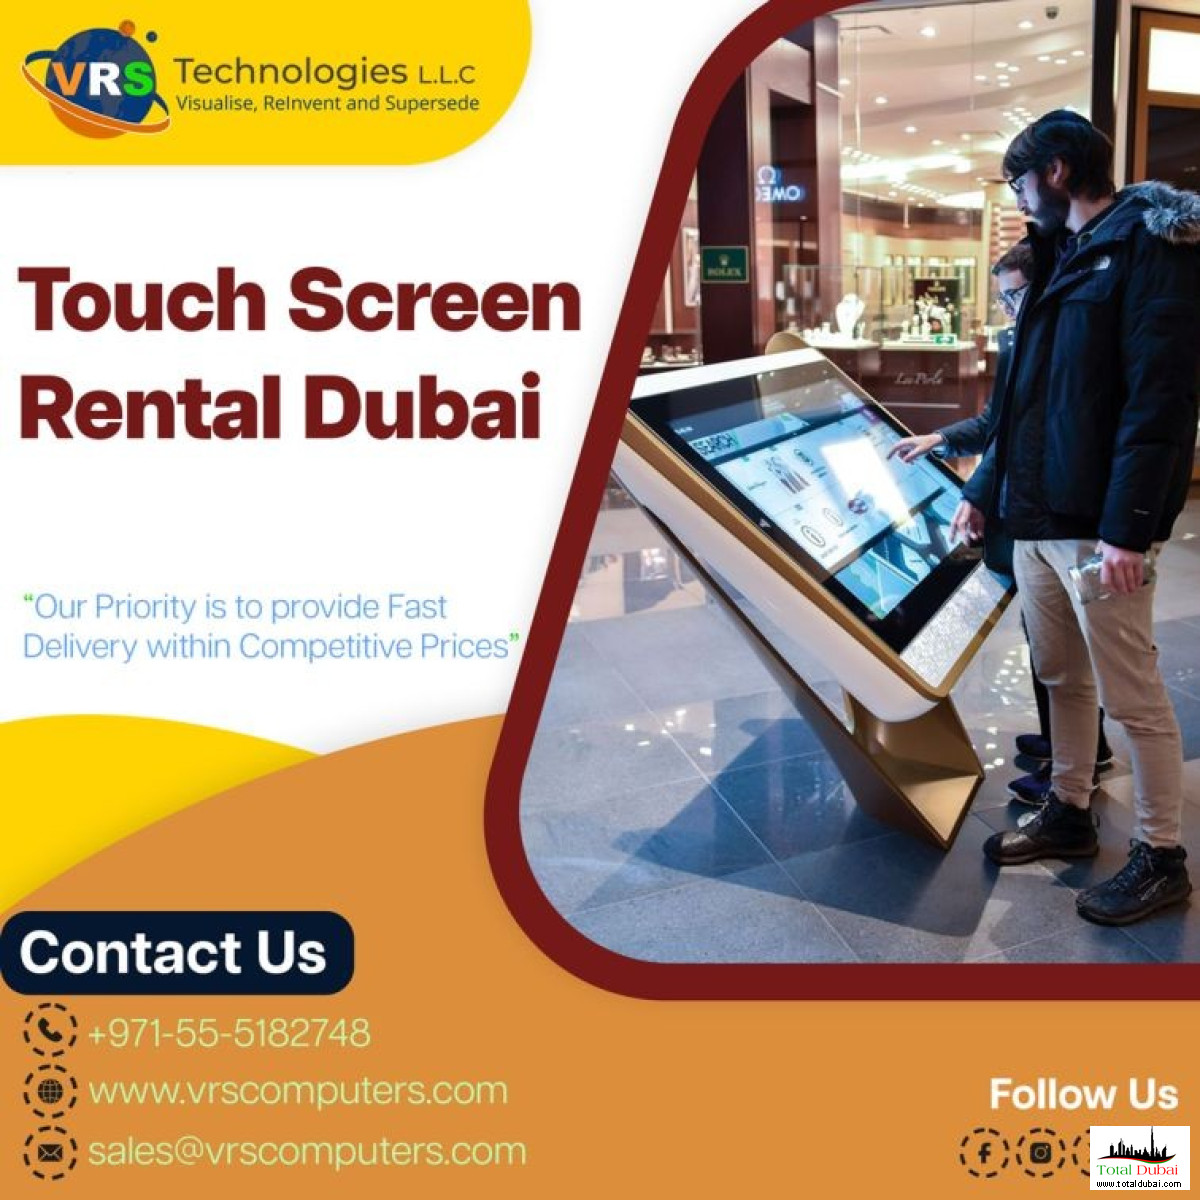 Hire Latest Touchscreens for Trade Shows in UAE